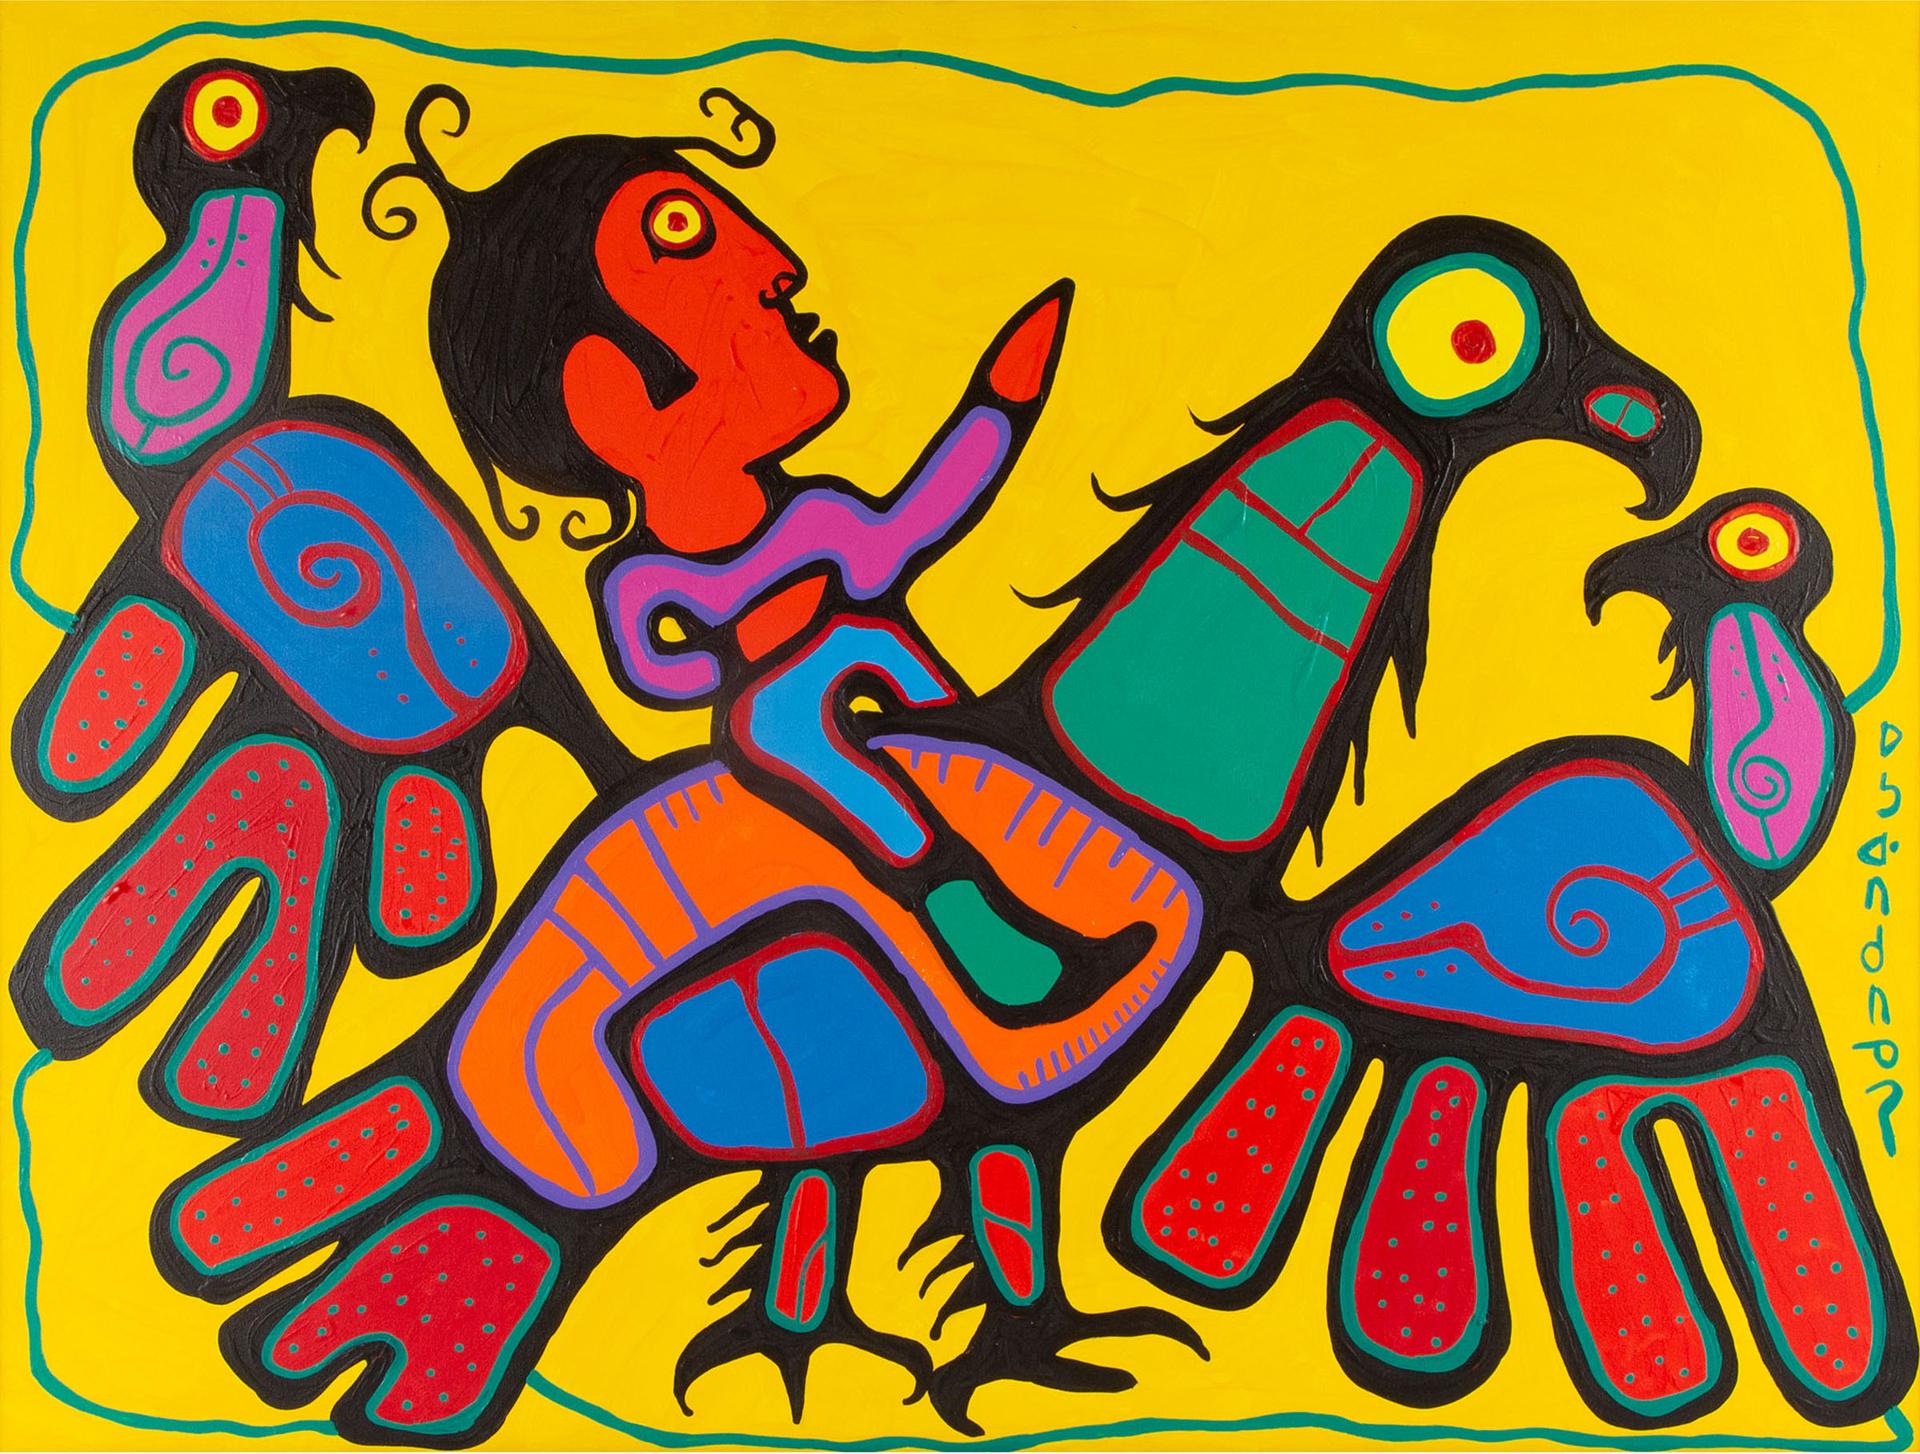 Norval H. Morrisseau (1931-2007) - We Are One / Shaman Riding An Eagle